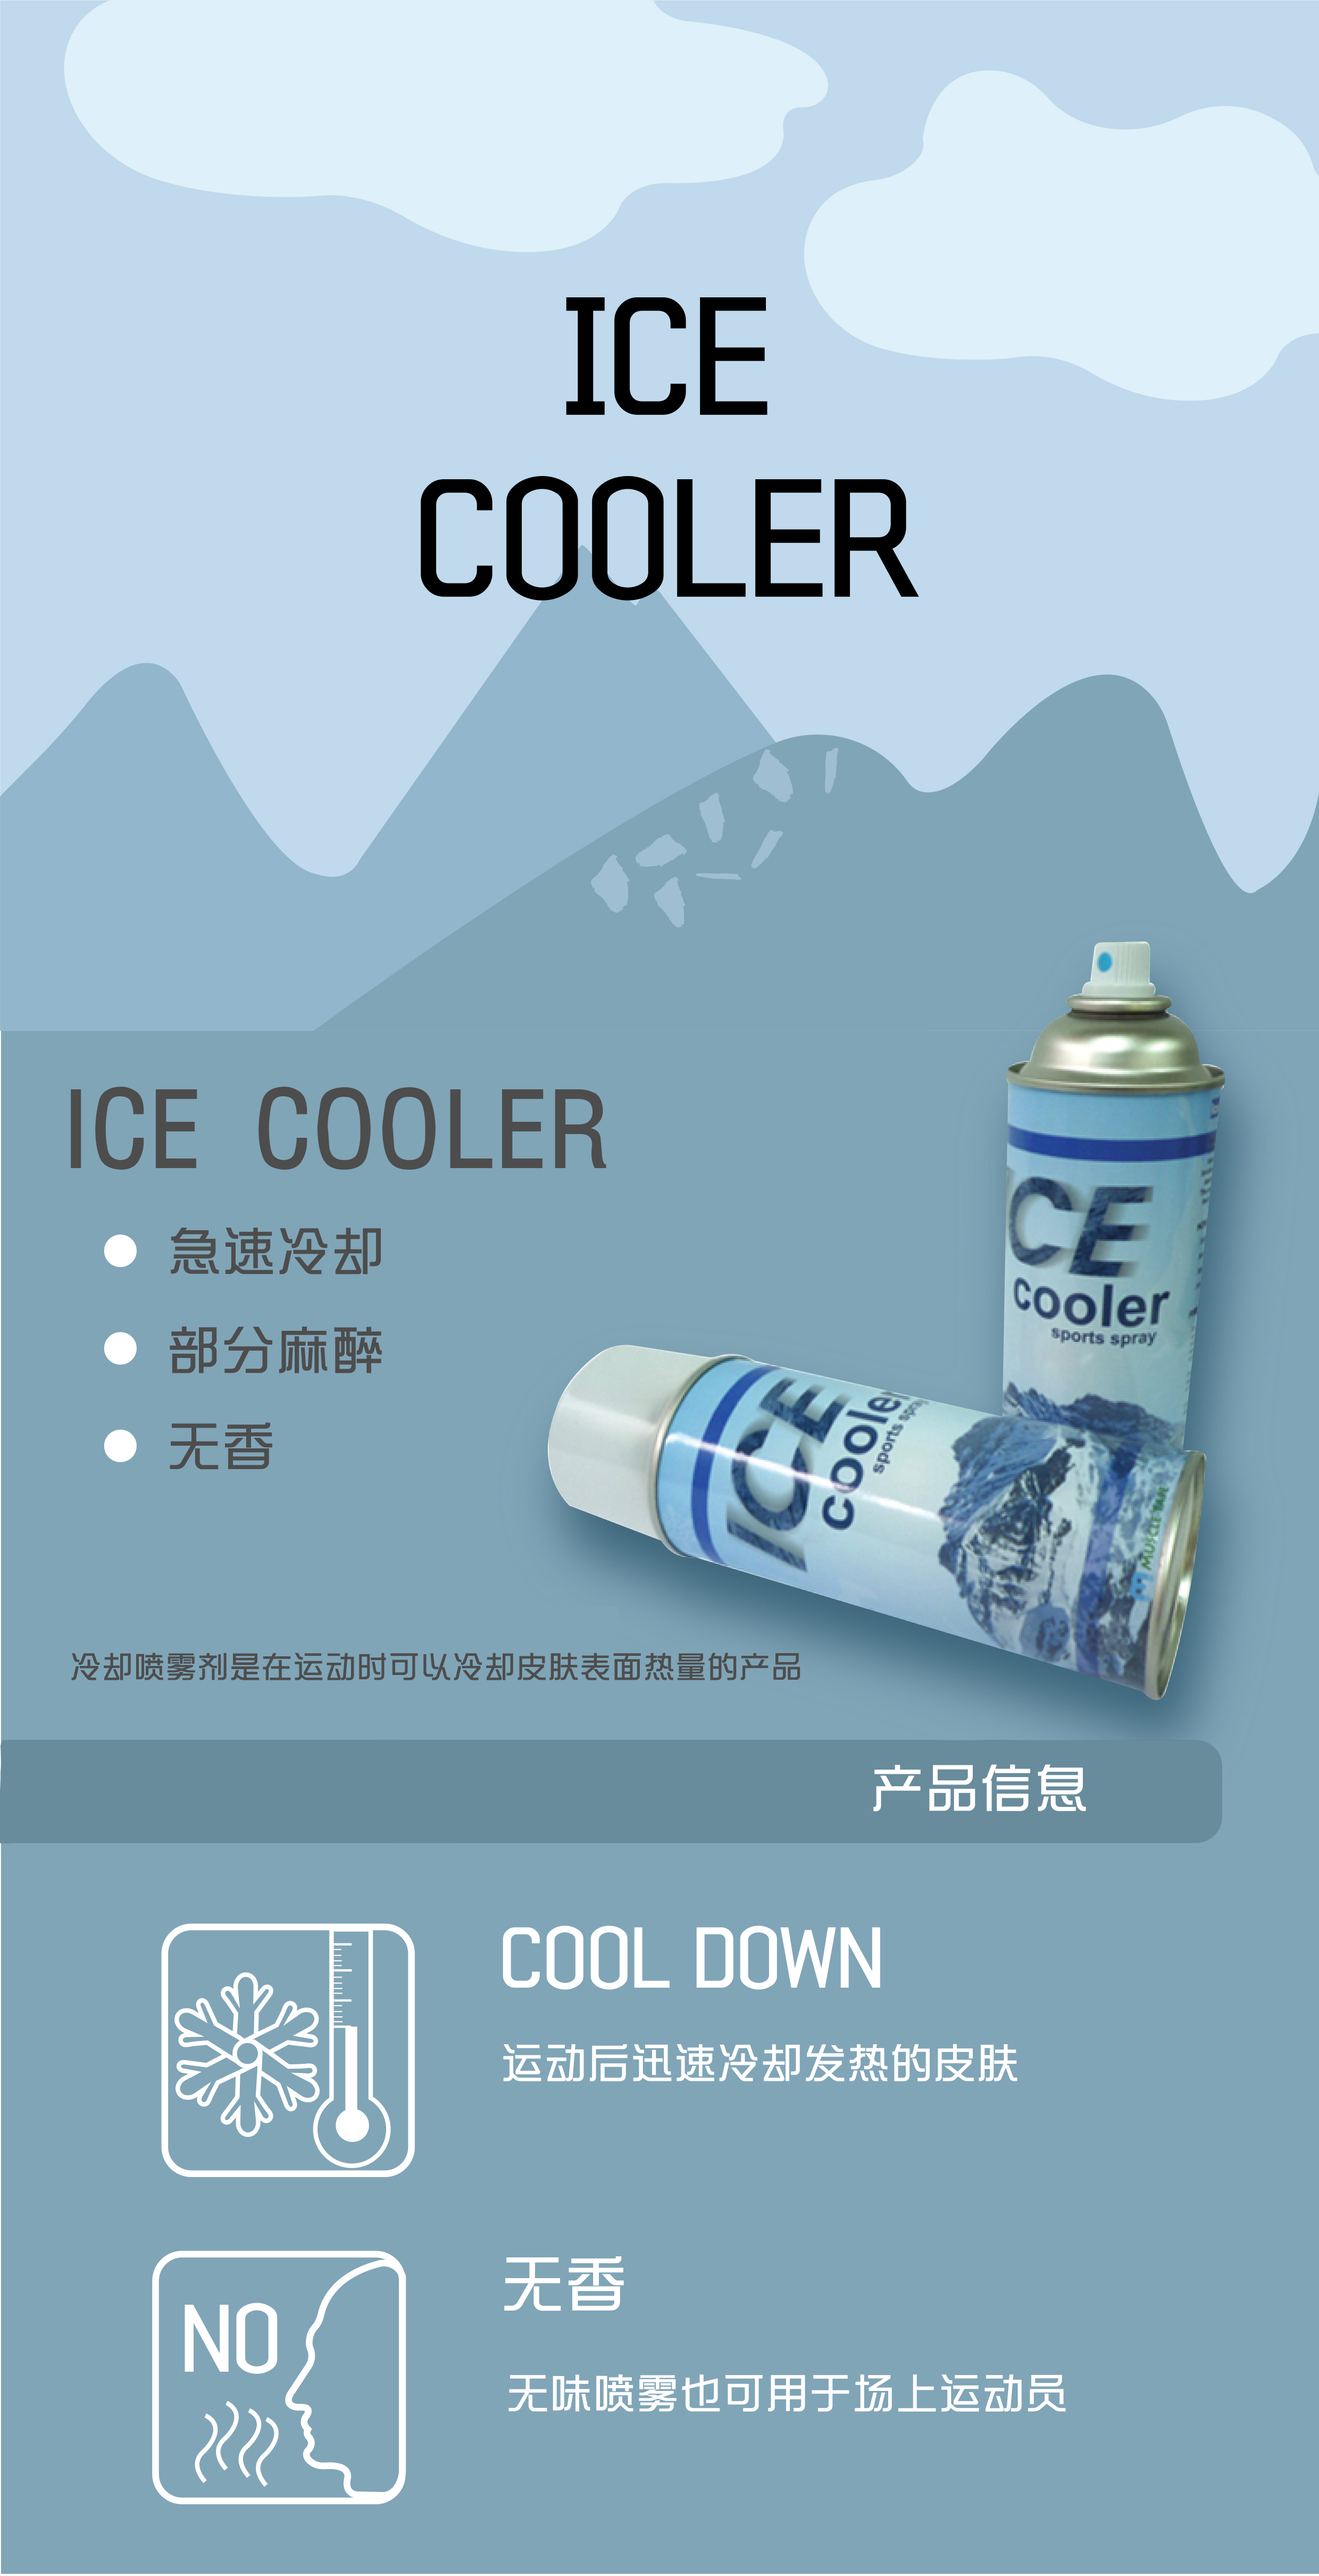  Chinese Ice cooler